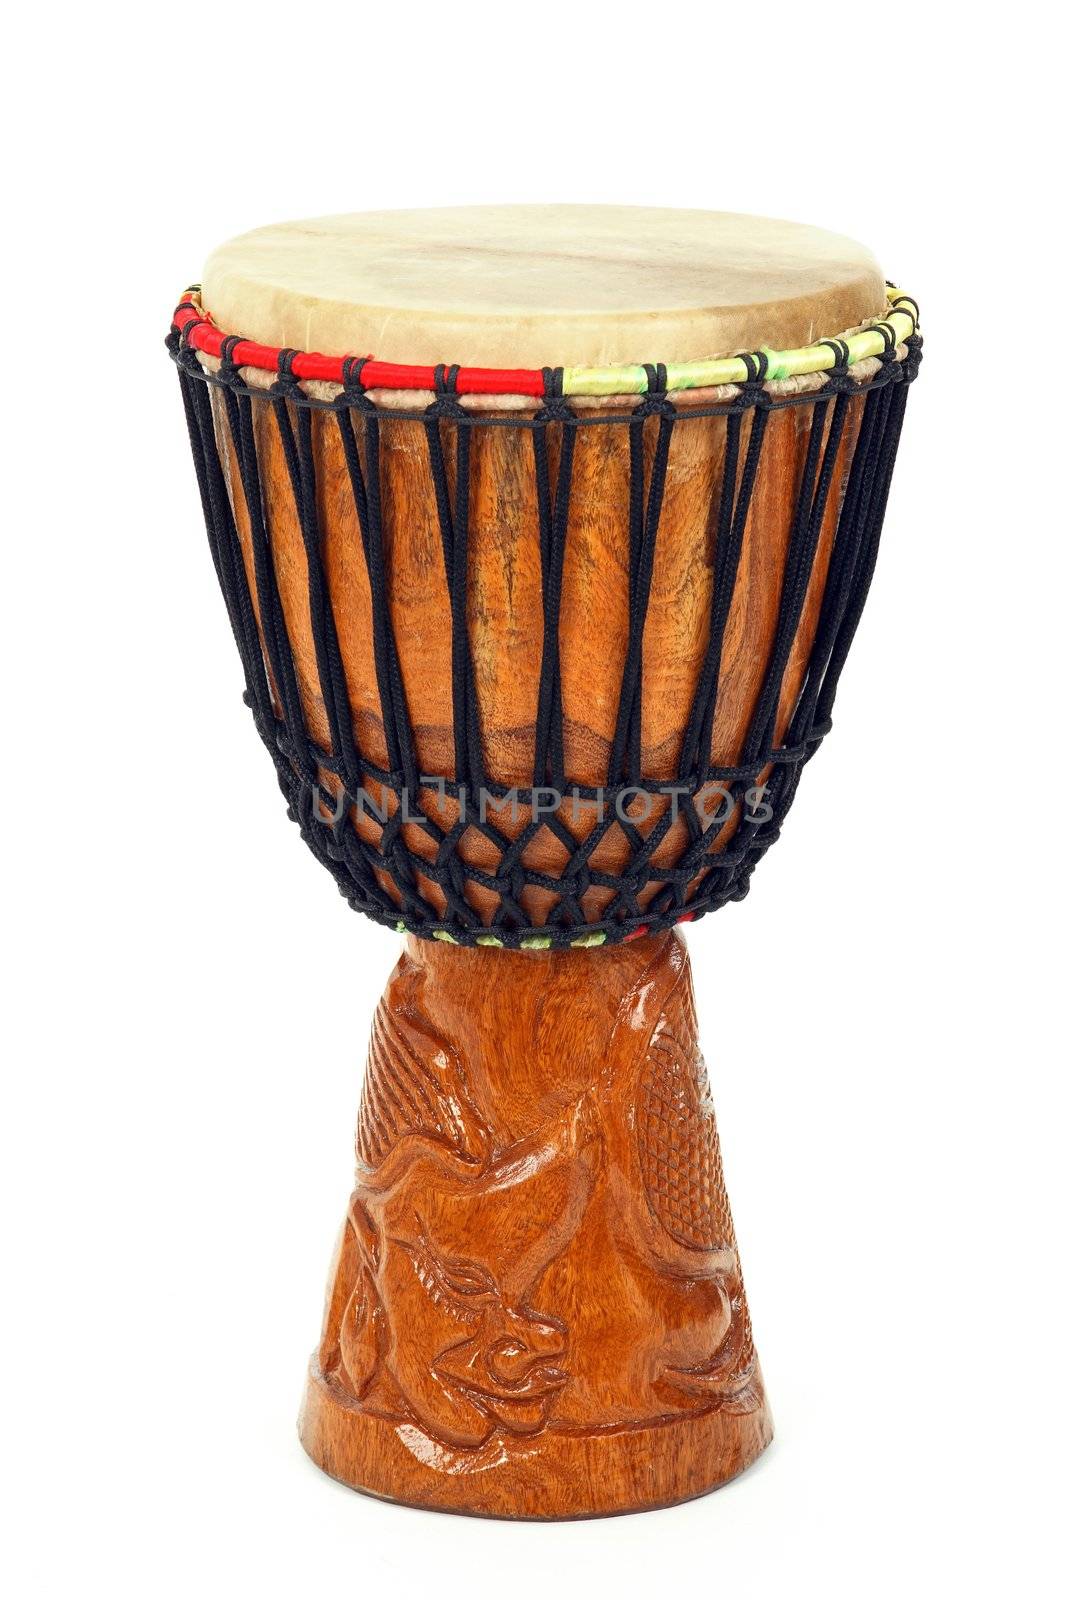 Carved African djembe drum on white background.